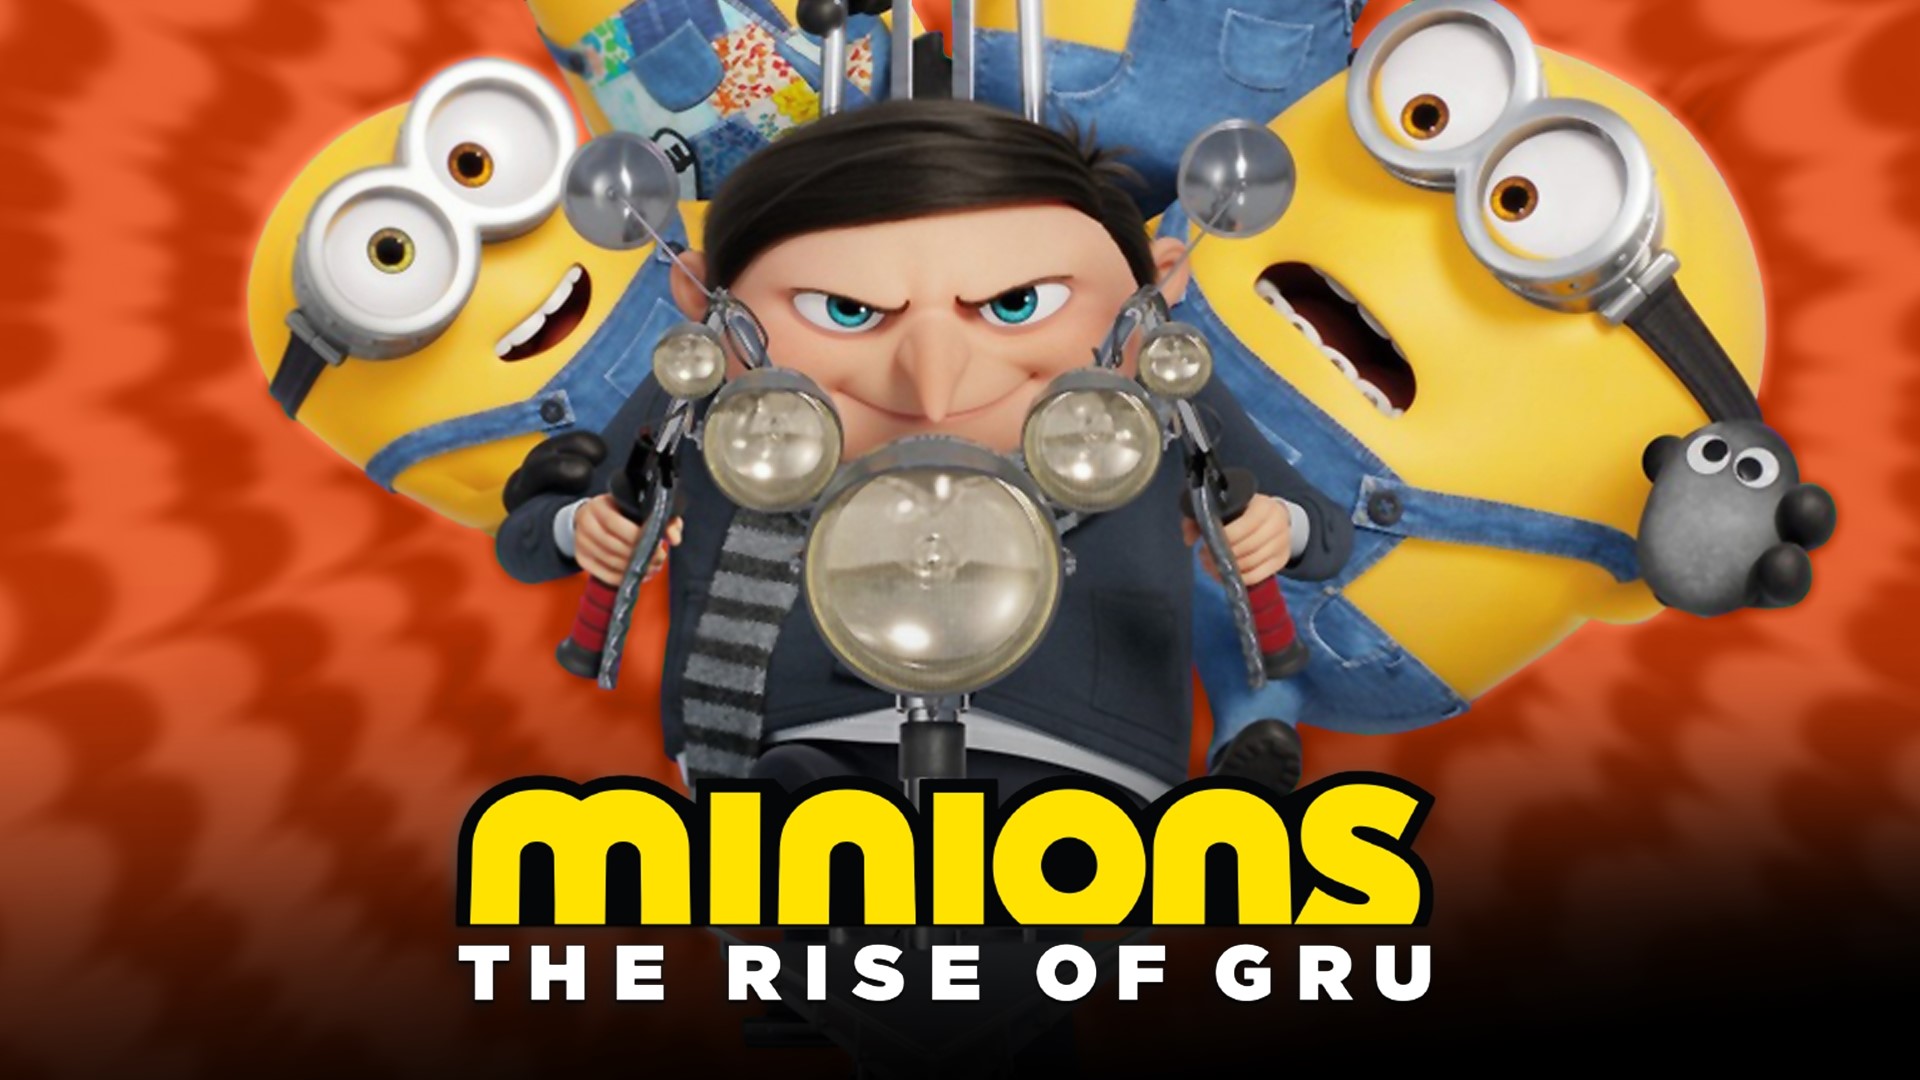 At this point we can't escape how fun Minions are whether we want them around or not and that includes The Rise of Gru, which is full of the best parts amplified.